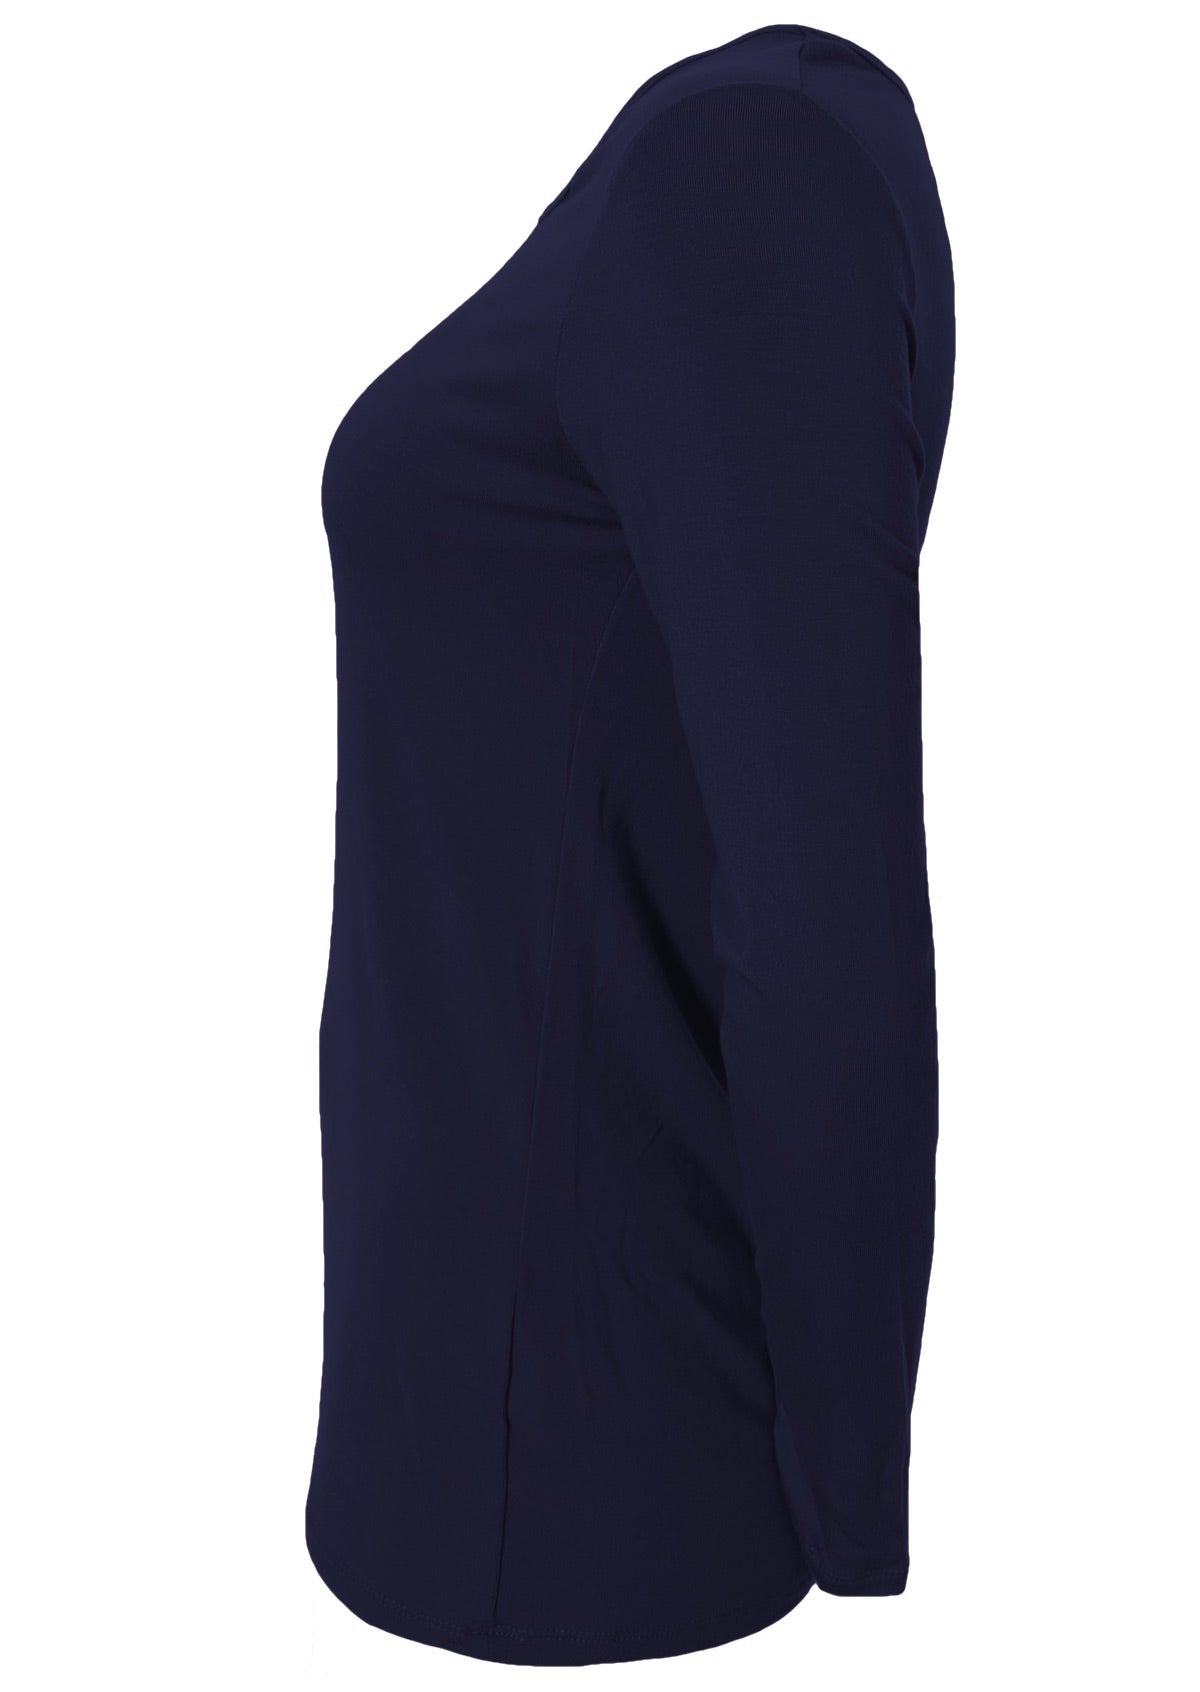 Side view of women's round neck navy blue long sleeve rayon top.